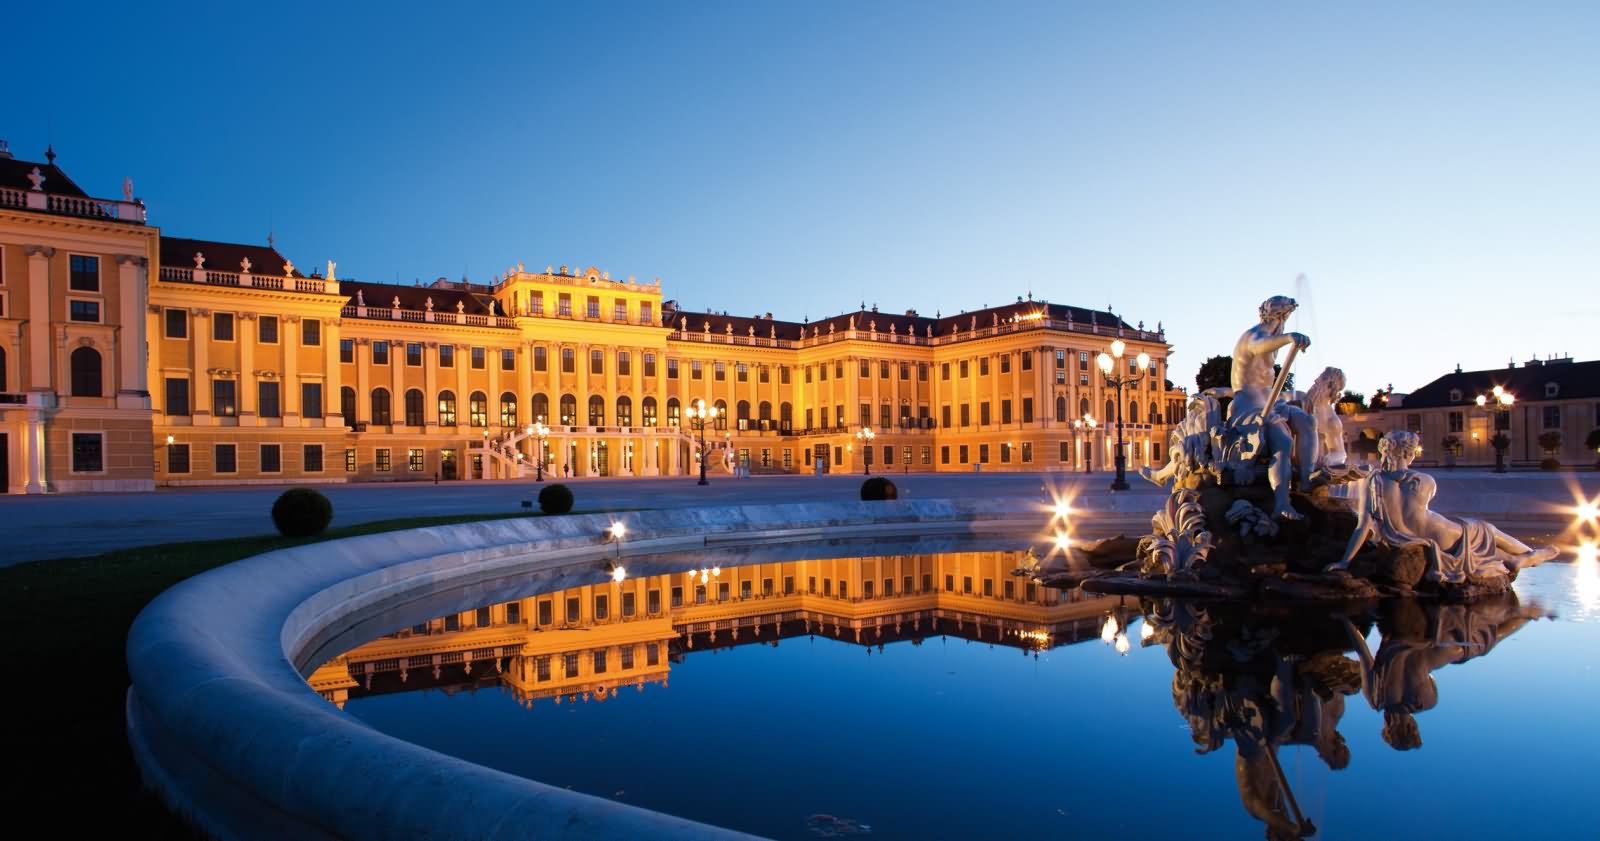 Side View Of The Schonbrunn Palace Lit Up At Dusk